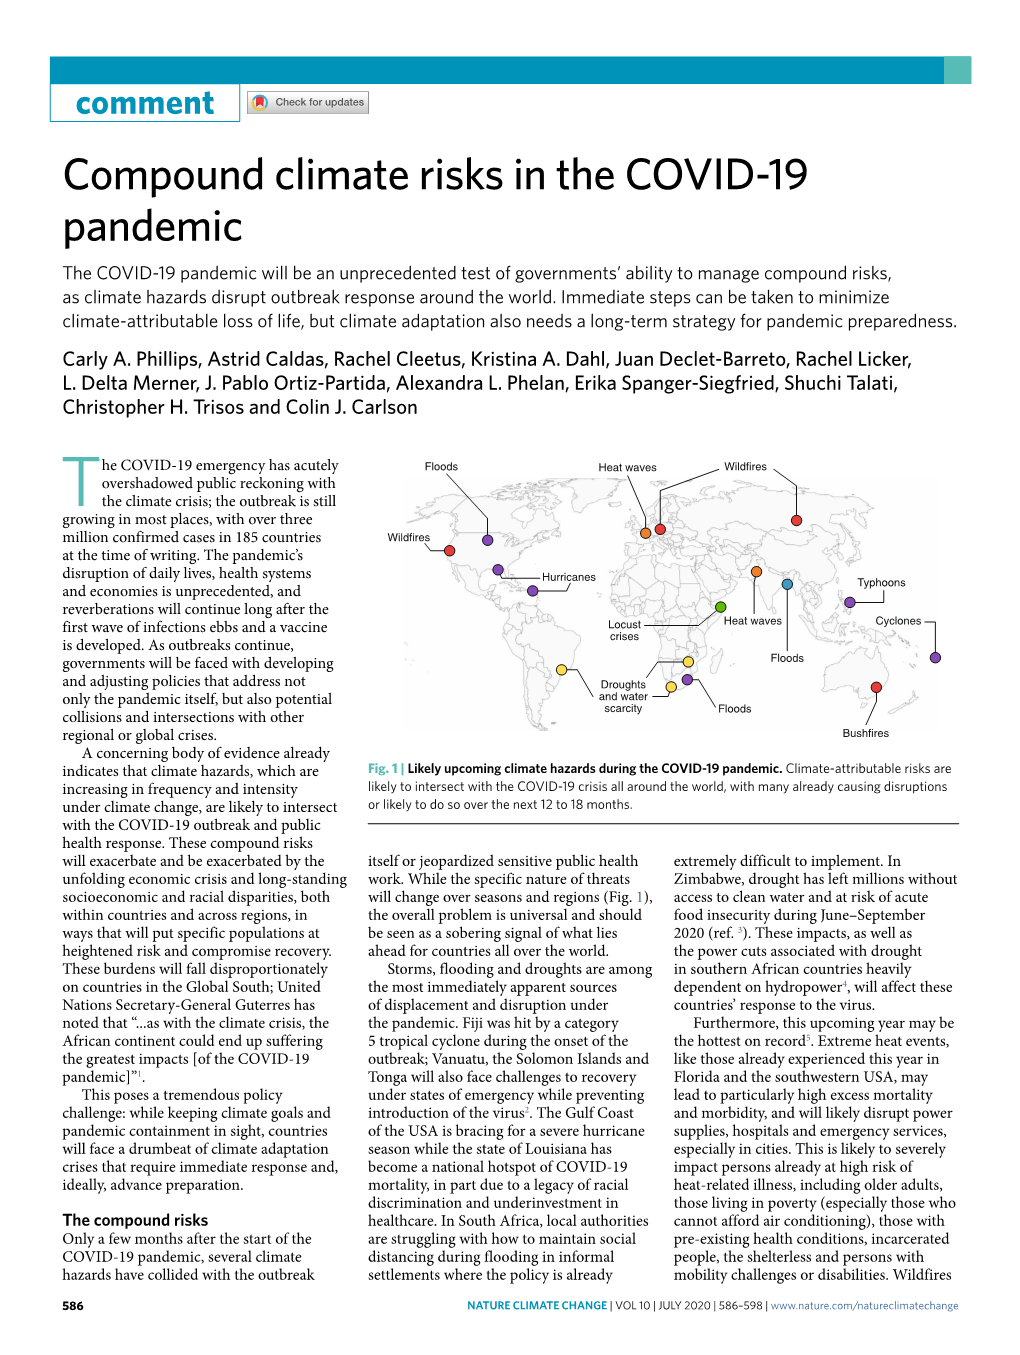 Compound Climate Risks in the COVID-19 Pandemic